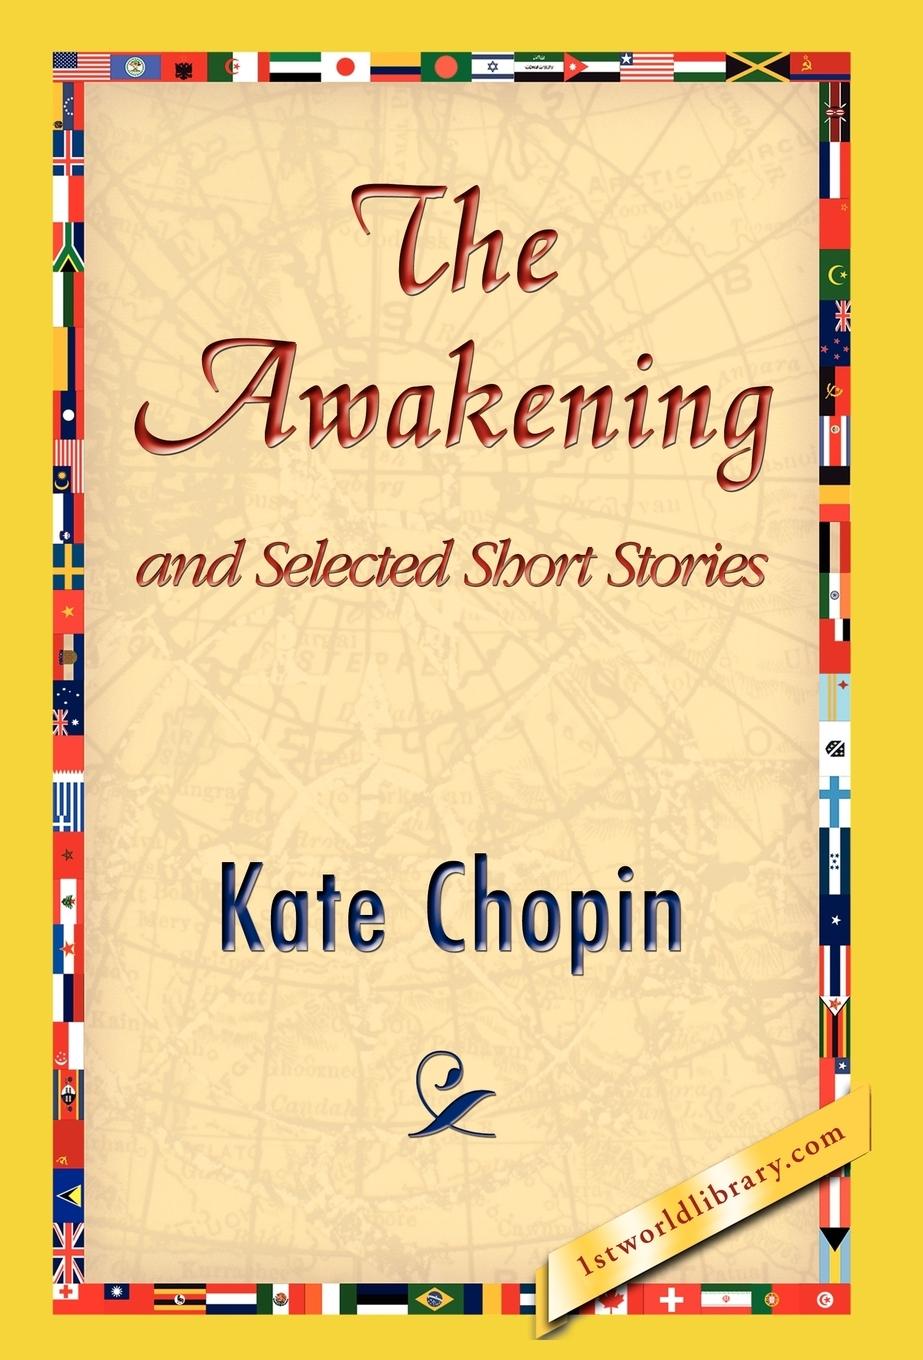 The Awakening and Selected Short Stories - Chopin, Kate